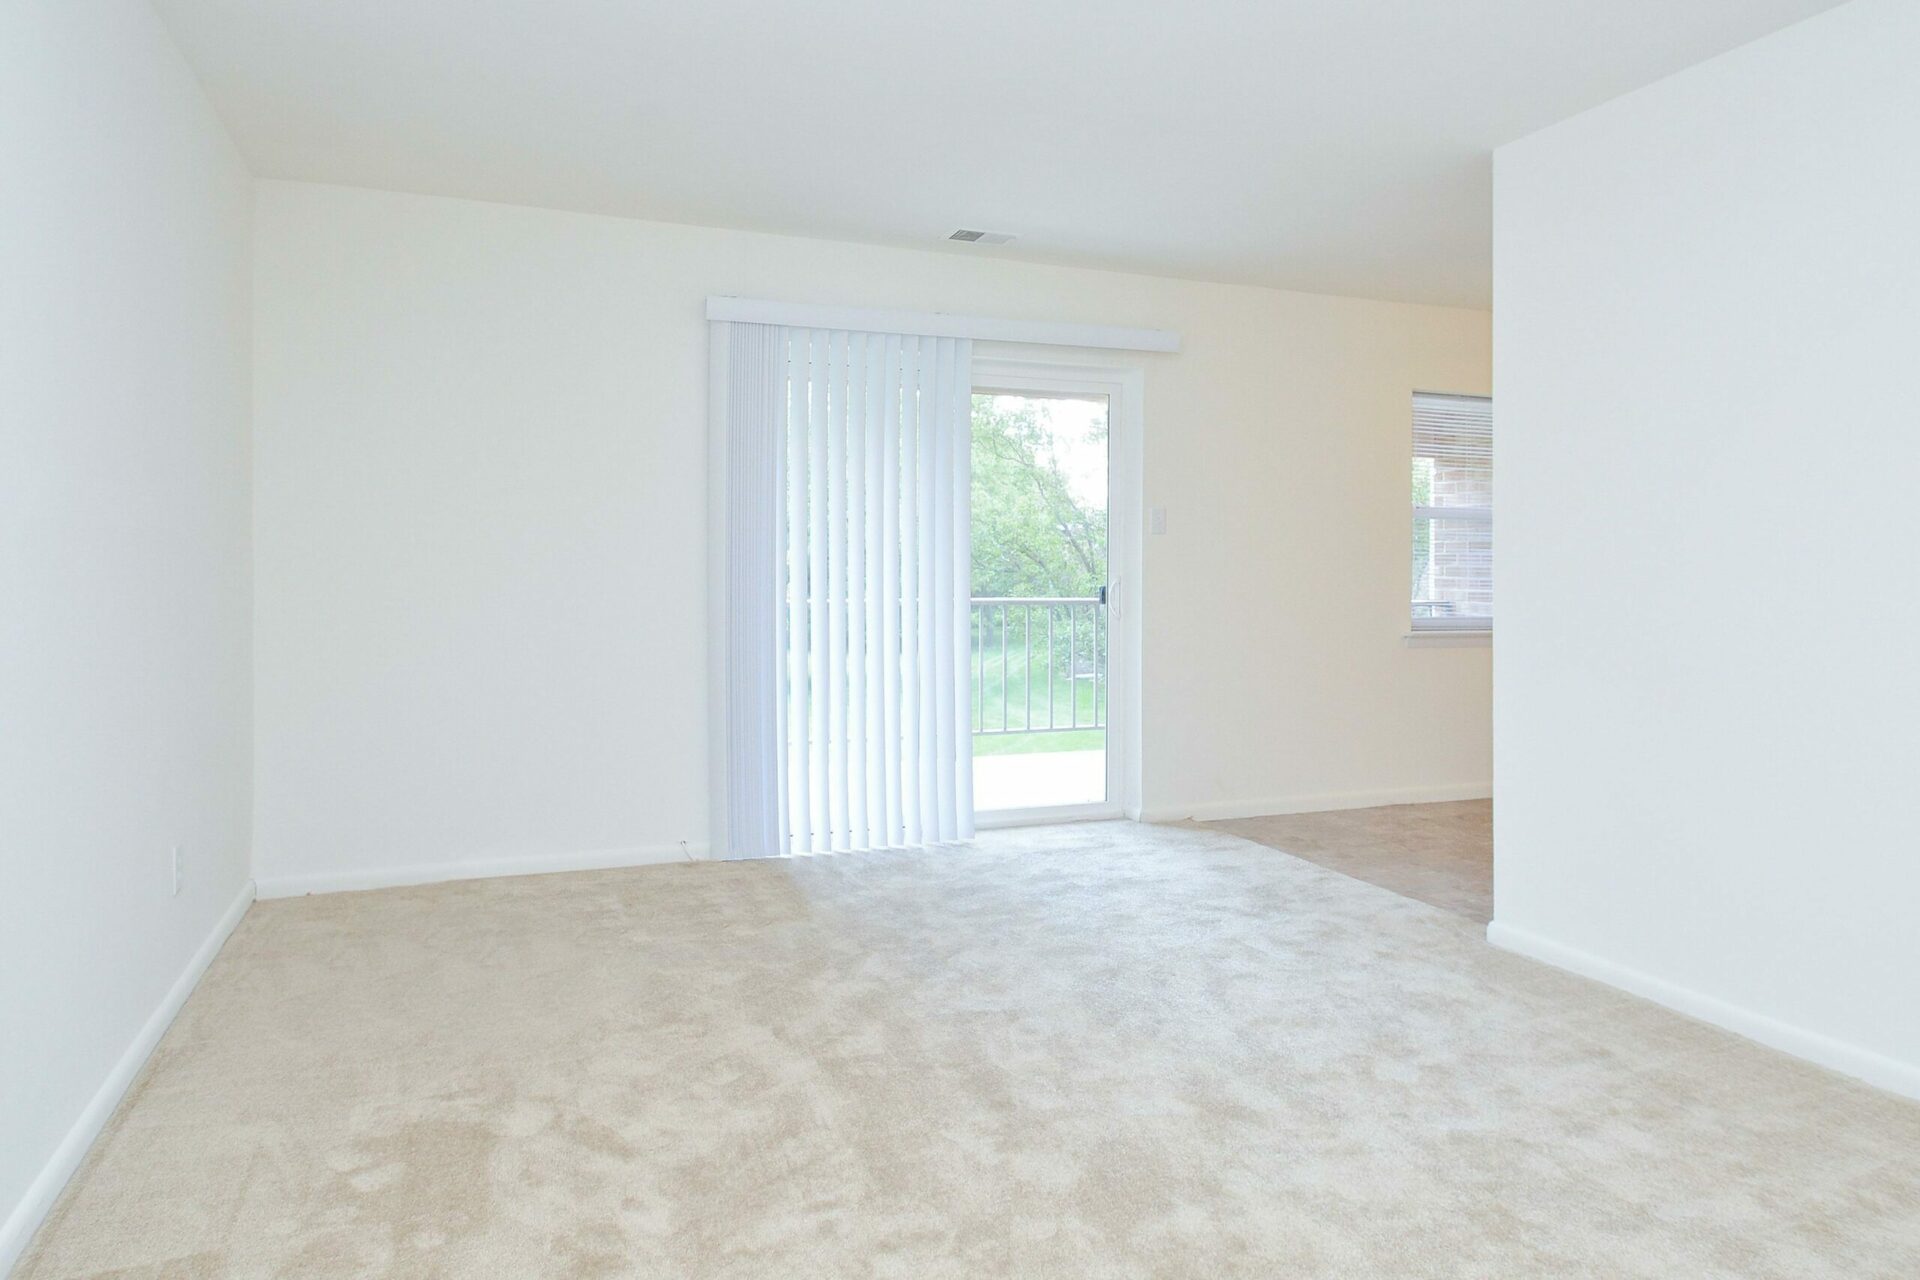 Living area with sliding doors to the balcony at Westover Village